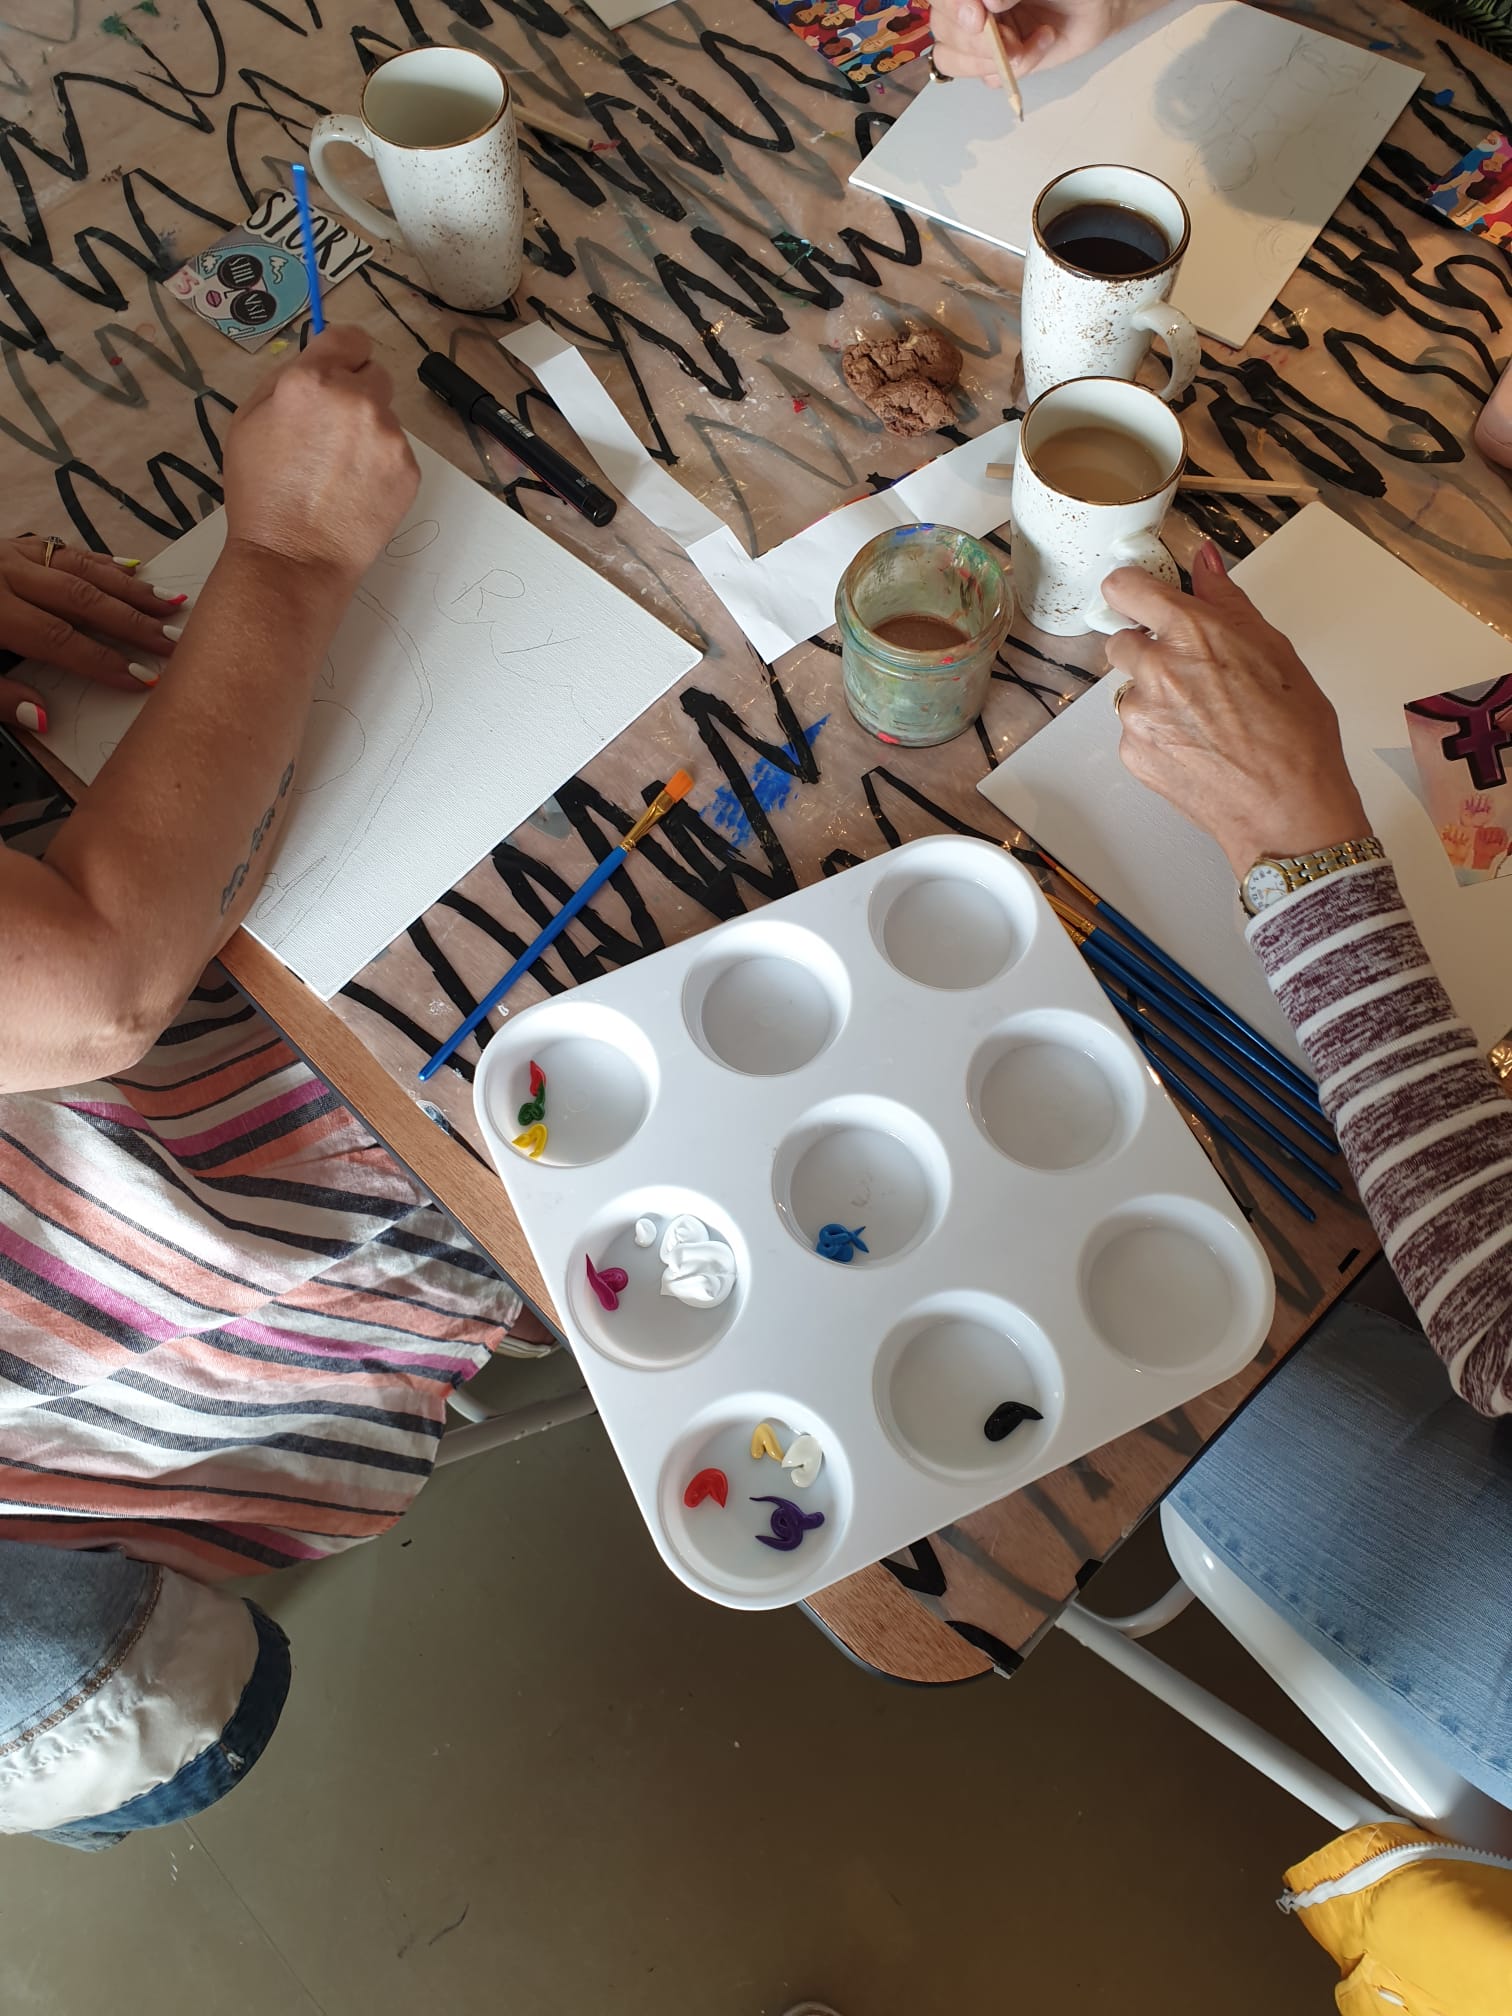 Image of two people with as piece of paper each and paint pot with cups of tea in the background.